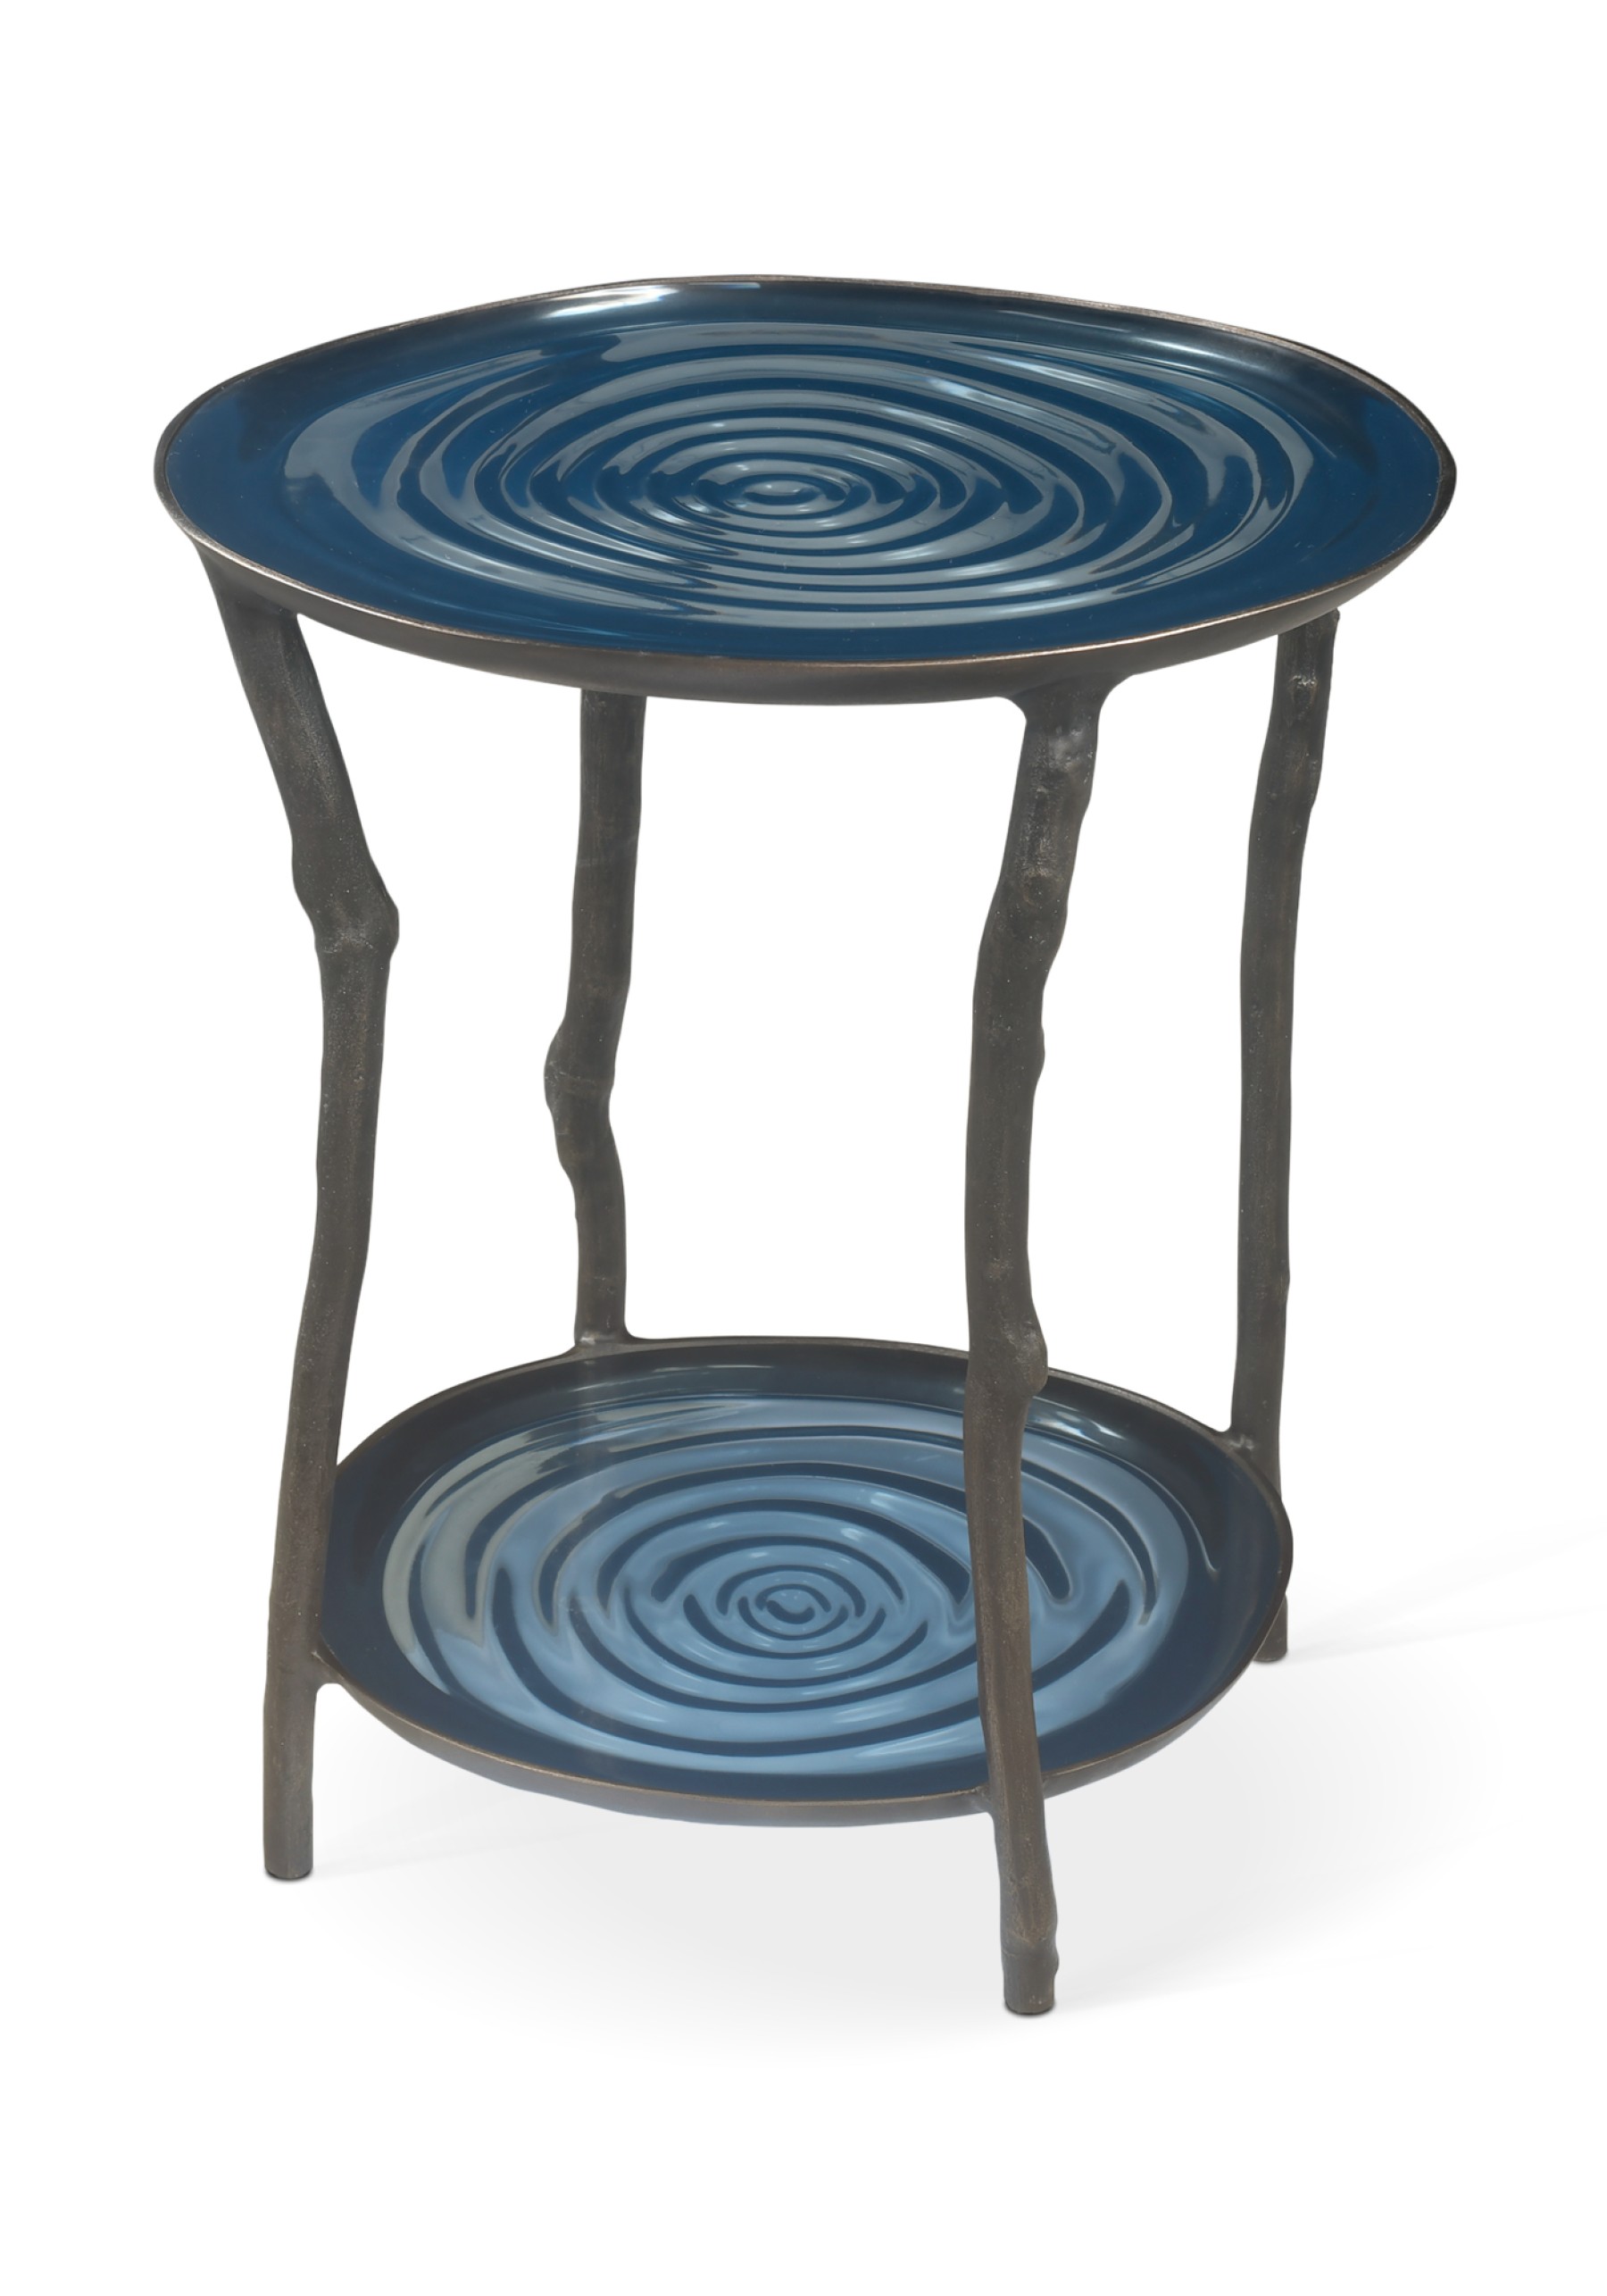 Droplet side table with shelf